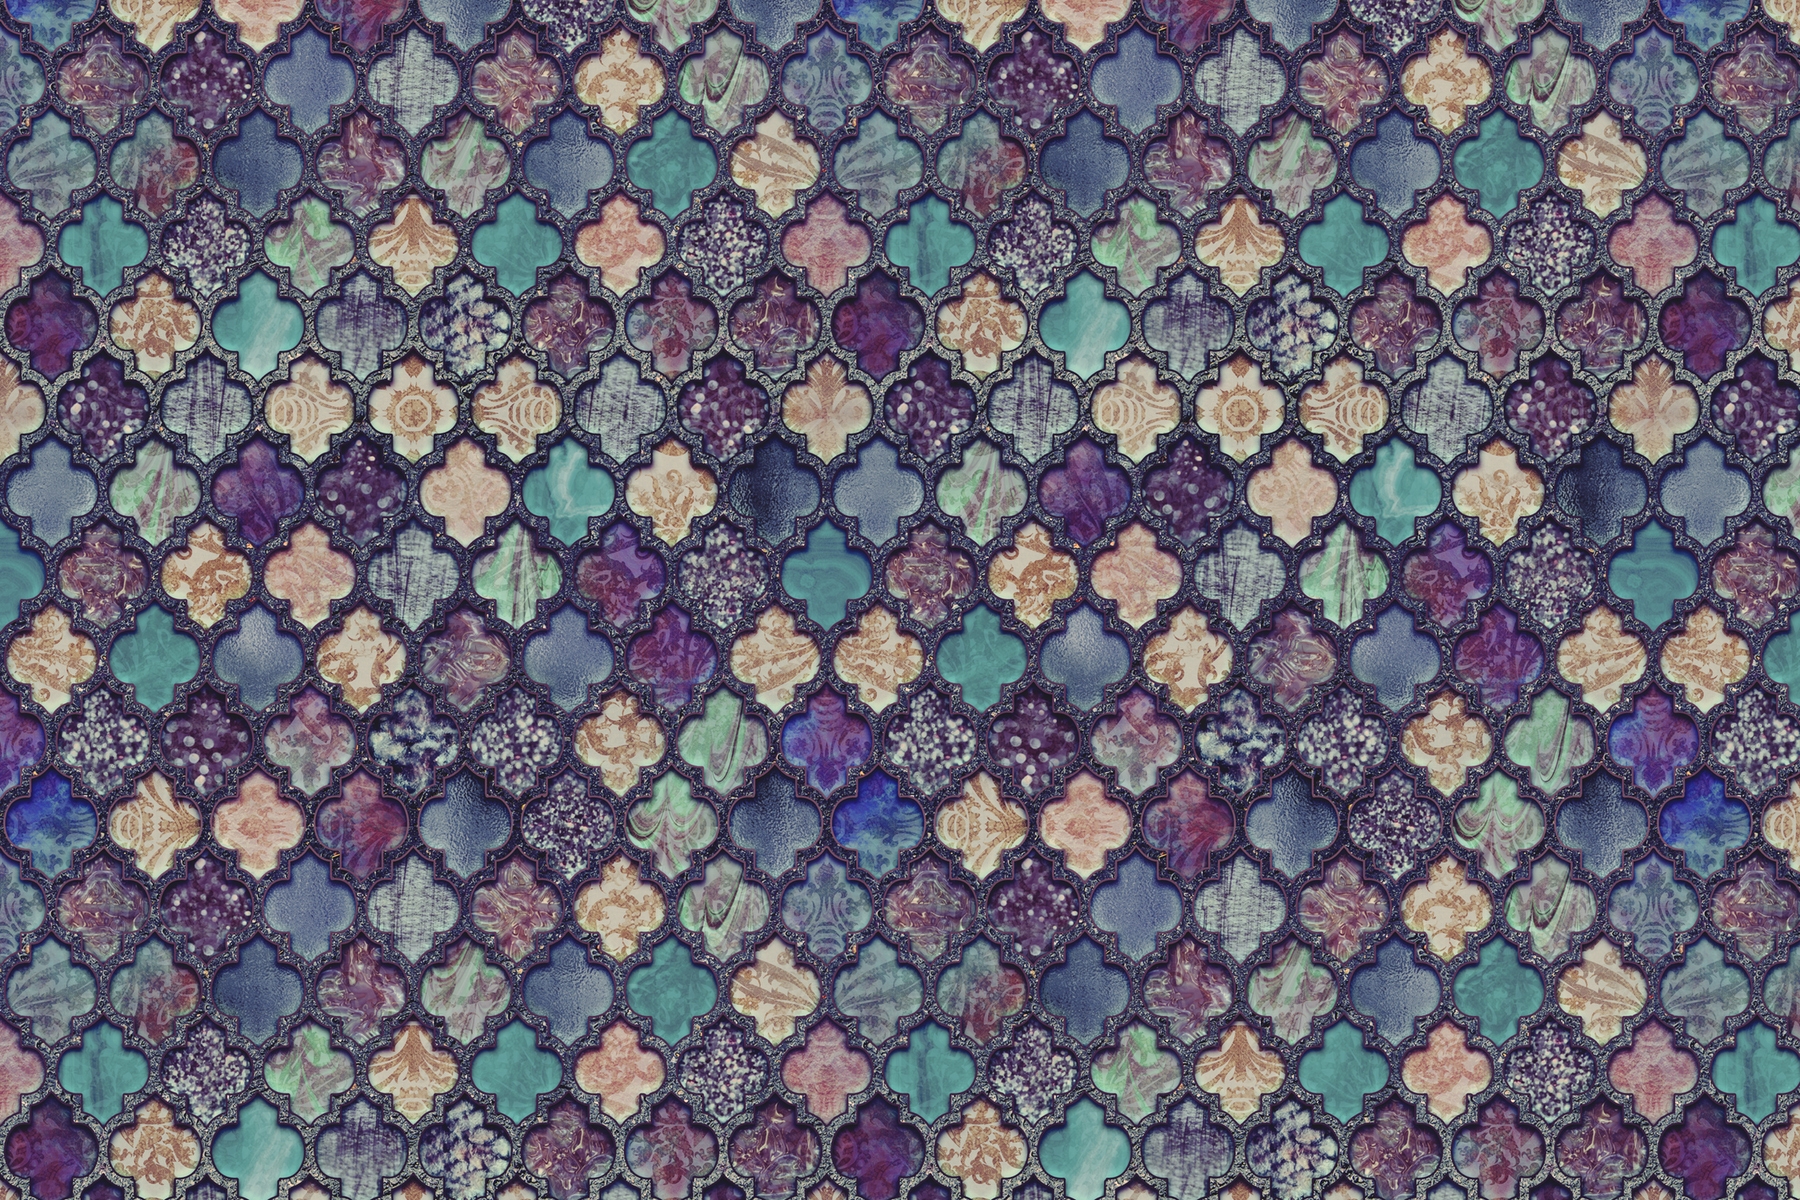 Buy Moroccan Tiles Teal Purple wallpaper US shipping at Happywall.com